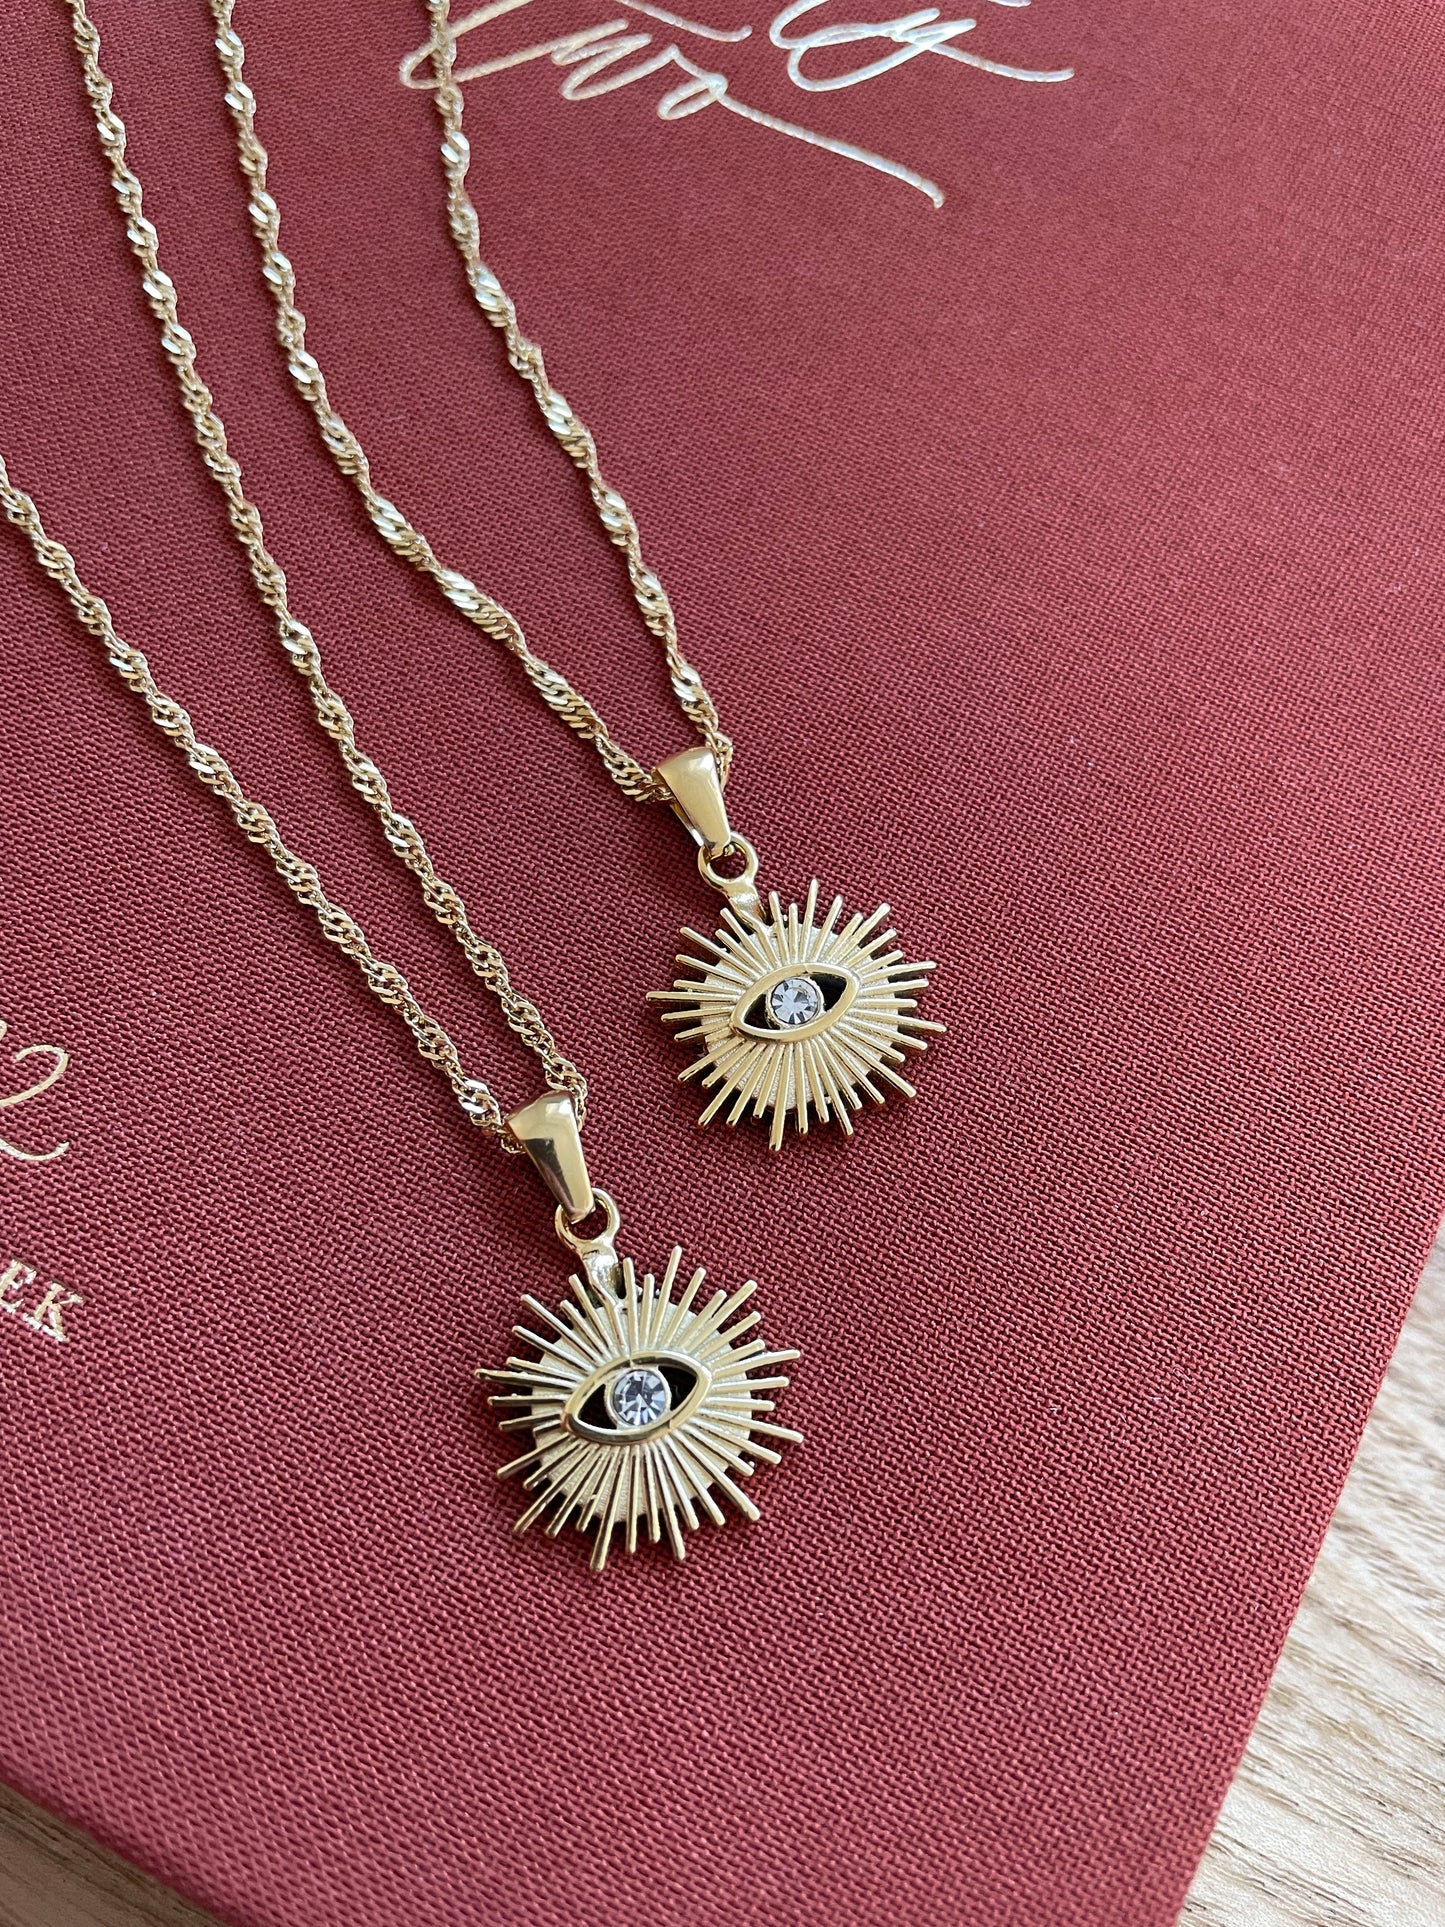 IMPERFECT - Theia – Mystic All Seeing Eye Necklace